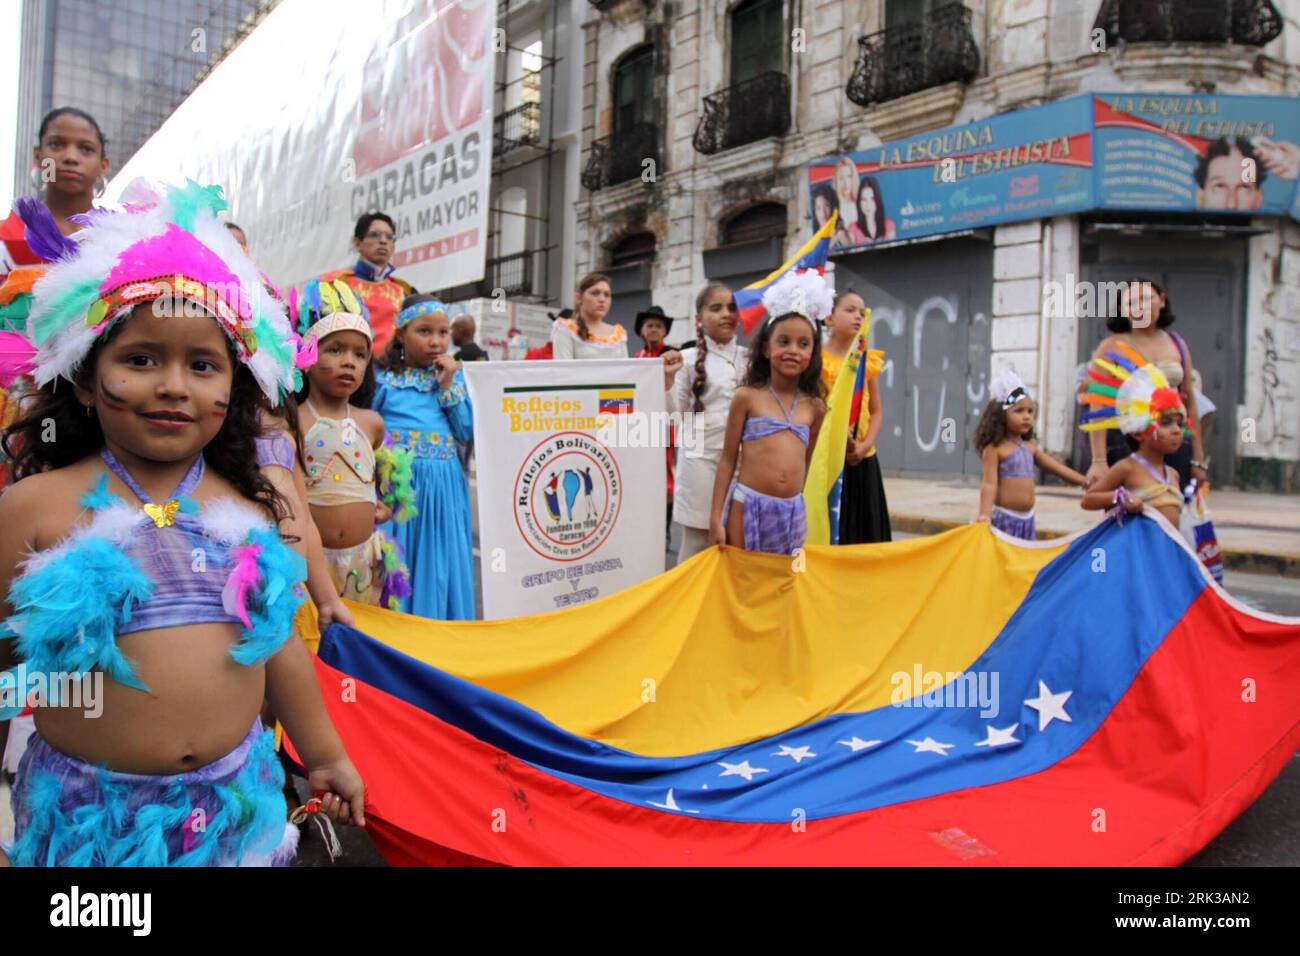 Bildnummer: 53399474  Datum: 21.09.2009  Copyright: imago/Xinhua (090921) -- CARACAS, Sept. 21, 2009 (Xinhua) -- Venezuelan girls are seen in a multicultural parade in central Caracas, capital of Venezuela, on Sept. 20, 2009. A multicultural parade featuring peoples from Africa and South America on Sunday marked the start of a cultural festival dedicated to the second South America-Africa Summit that will take place on Margarita Island, a tourist resort in northeastern Venezuela. (Xinhua/Bolivar News Agency) (lr) (2)VENEZUELA-CARACAS-MULTICULTURAL PARADE PUBLICATIONxNOTxINxCHN Kultur Festival Stock Photo